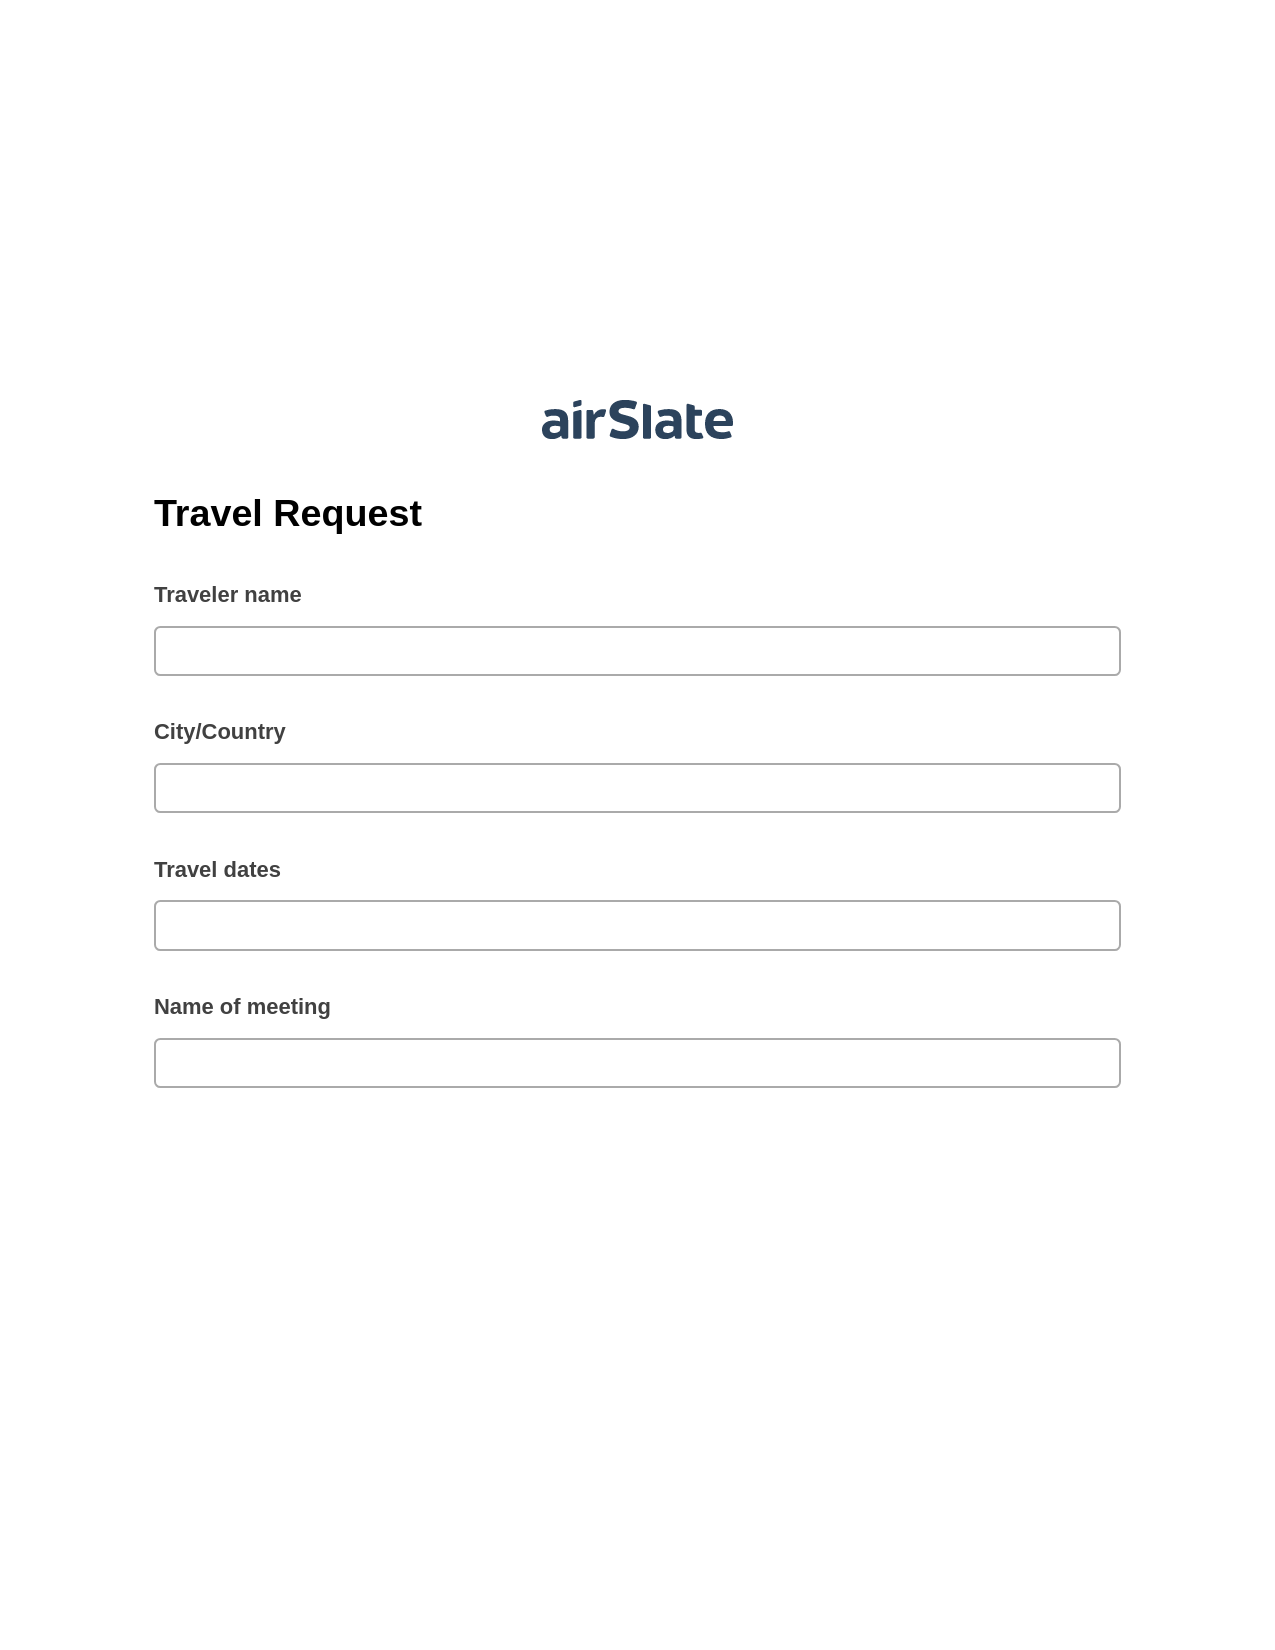 Travel Request Pre-fill from another Slate Bot, Create Slate Reminder Bot, Export to Salesforce Bot